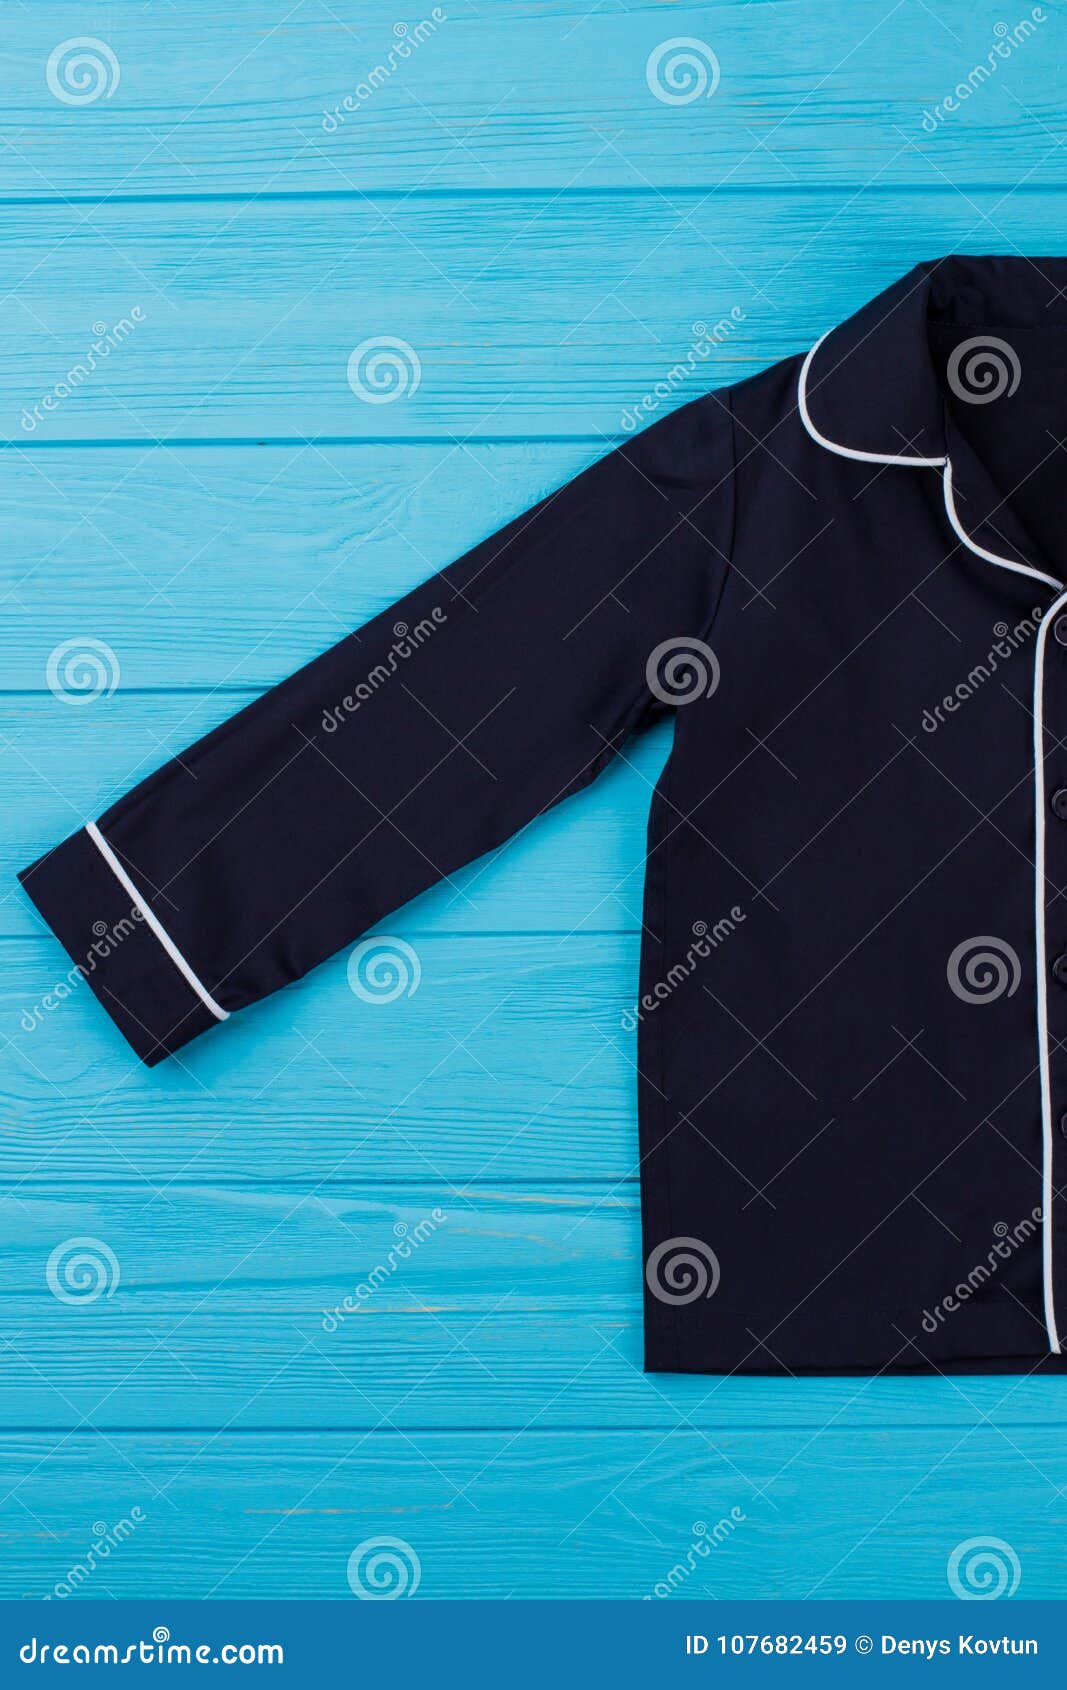 Navy Shirt with White Edging Stock Image - Image of button, home: 107682459